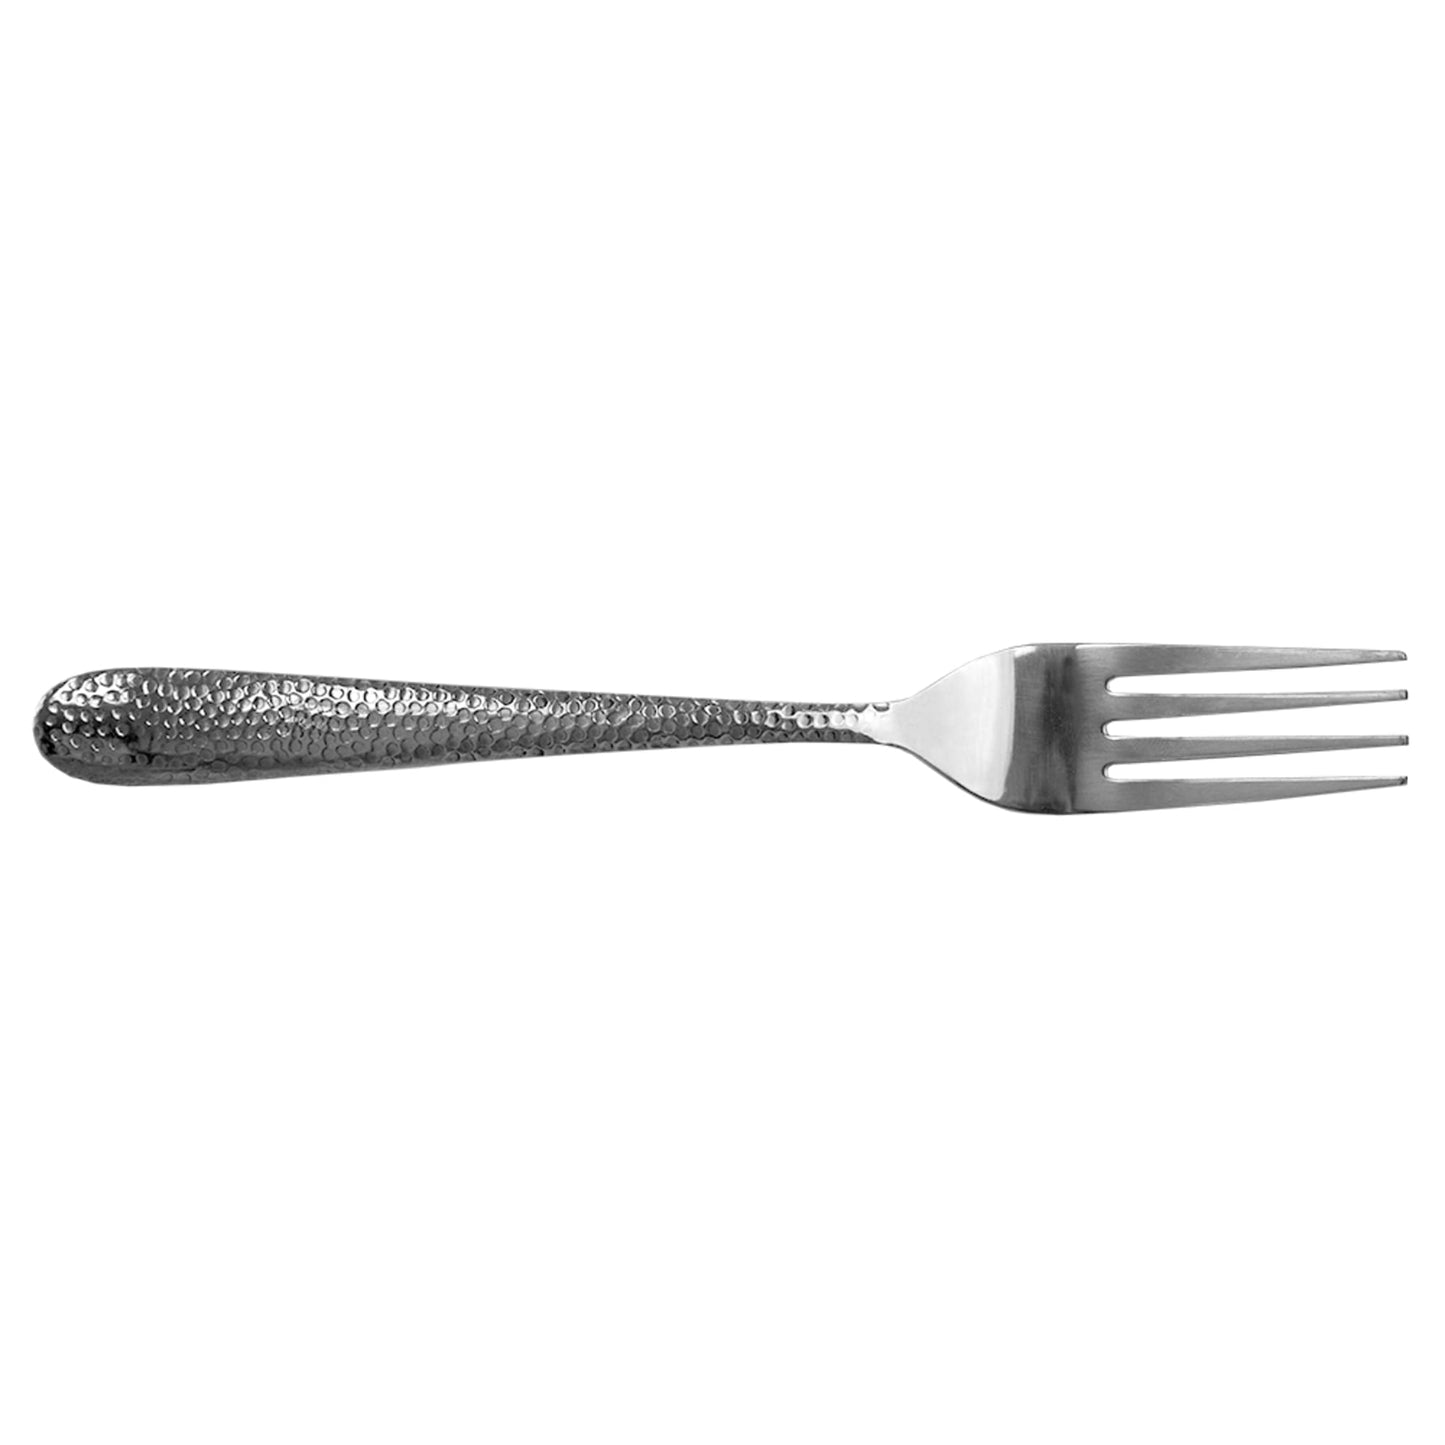 Hammered Stainless Steel Dinner Forks, (Pack of 4), Silver